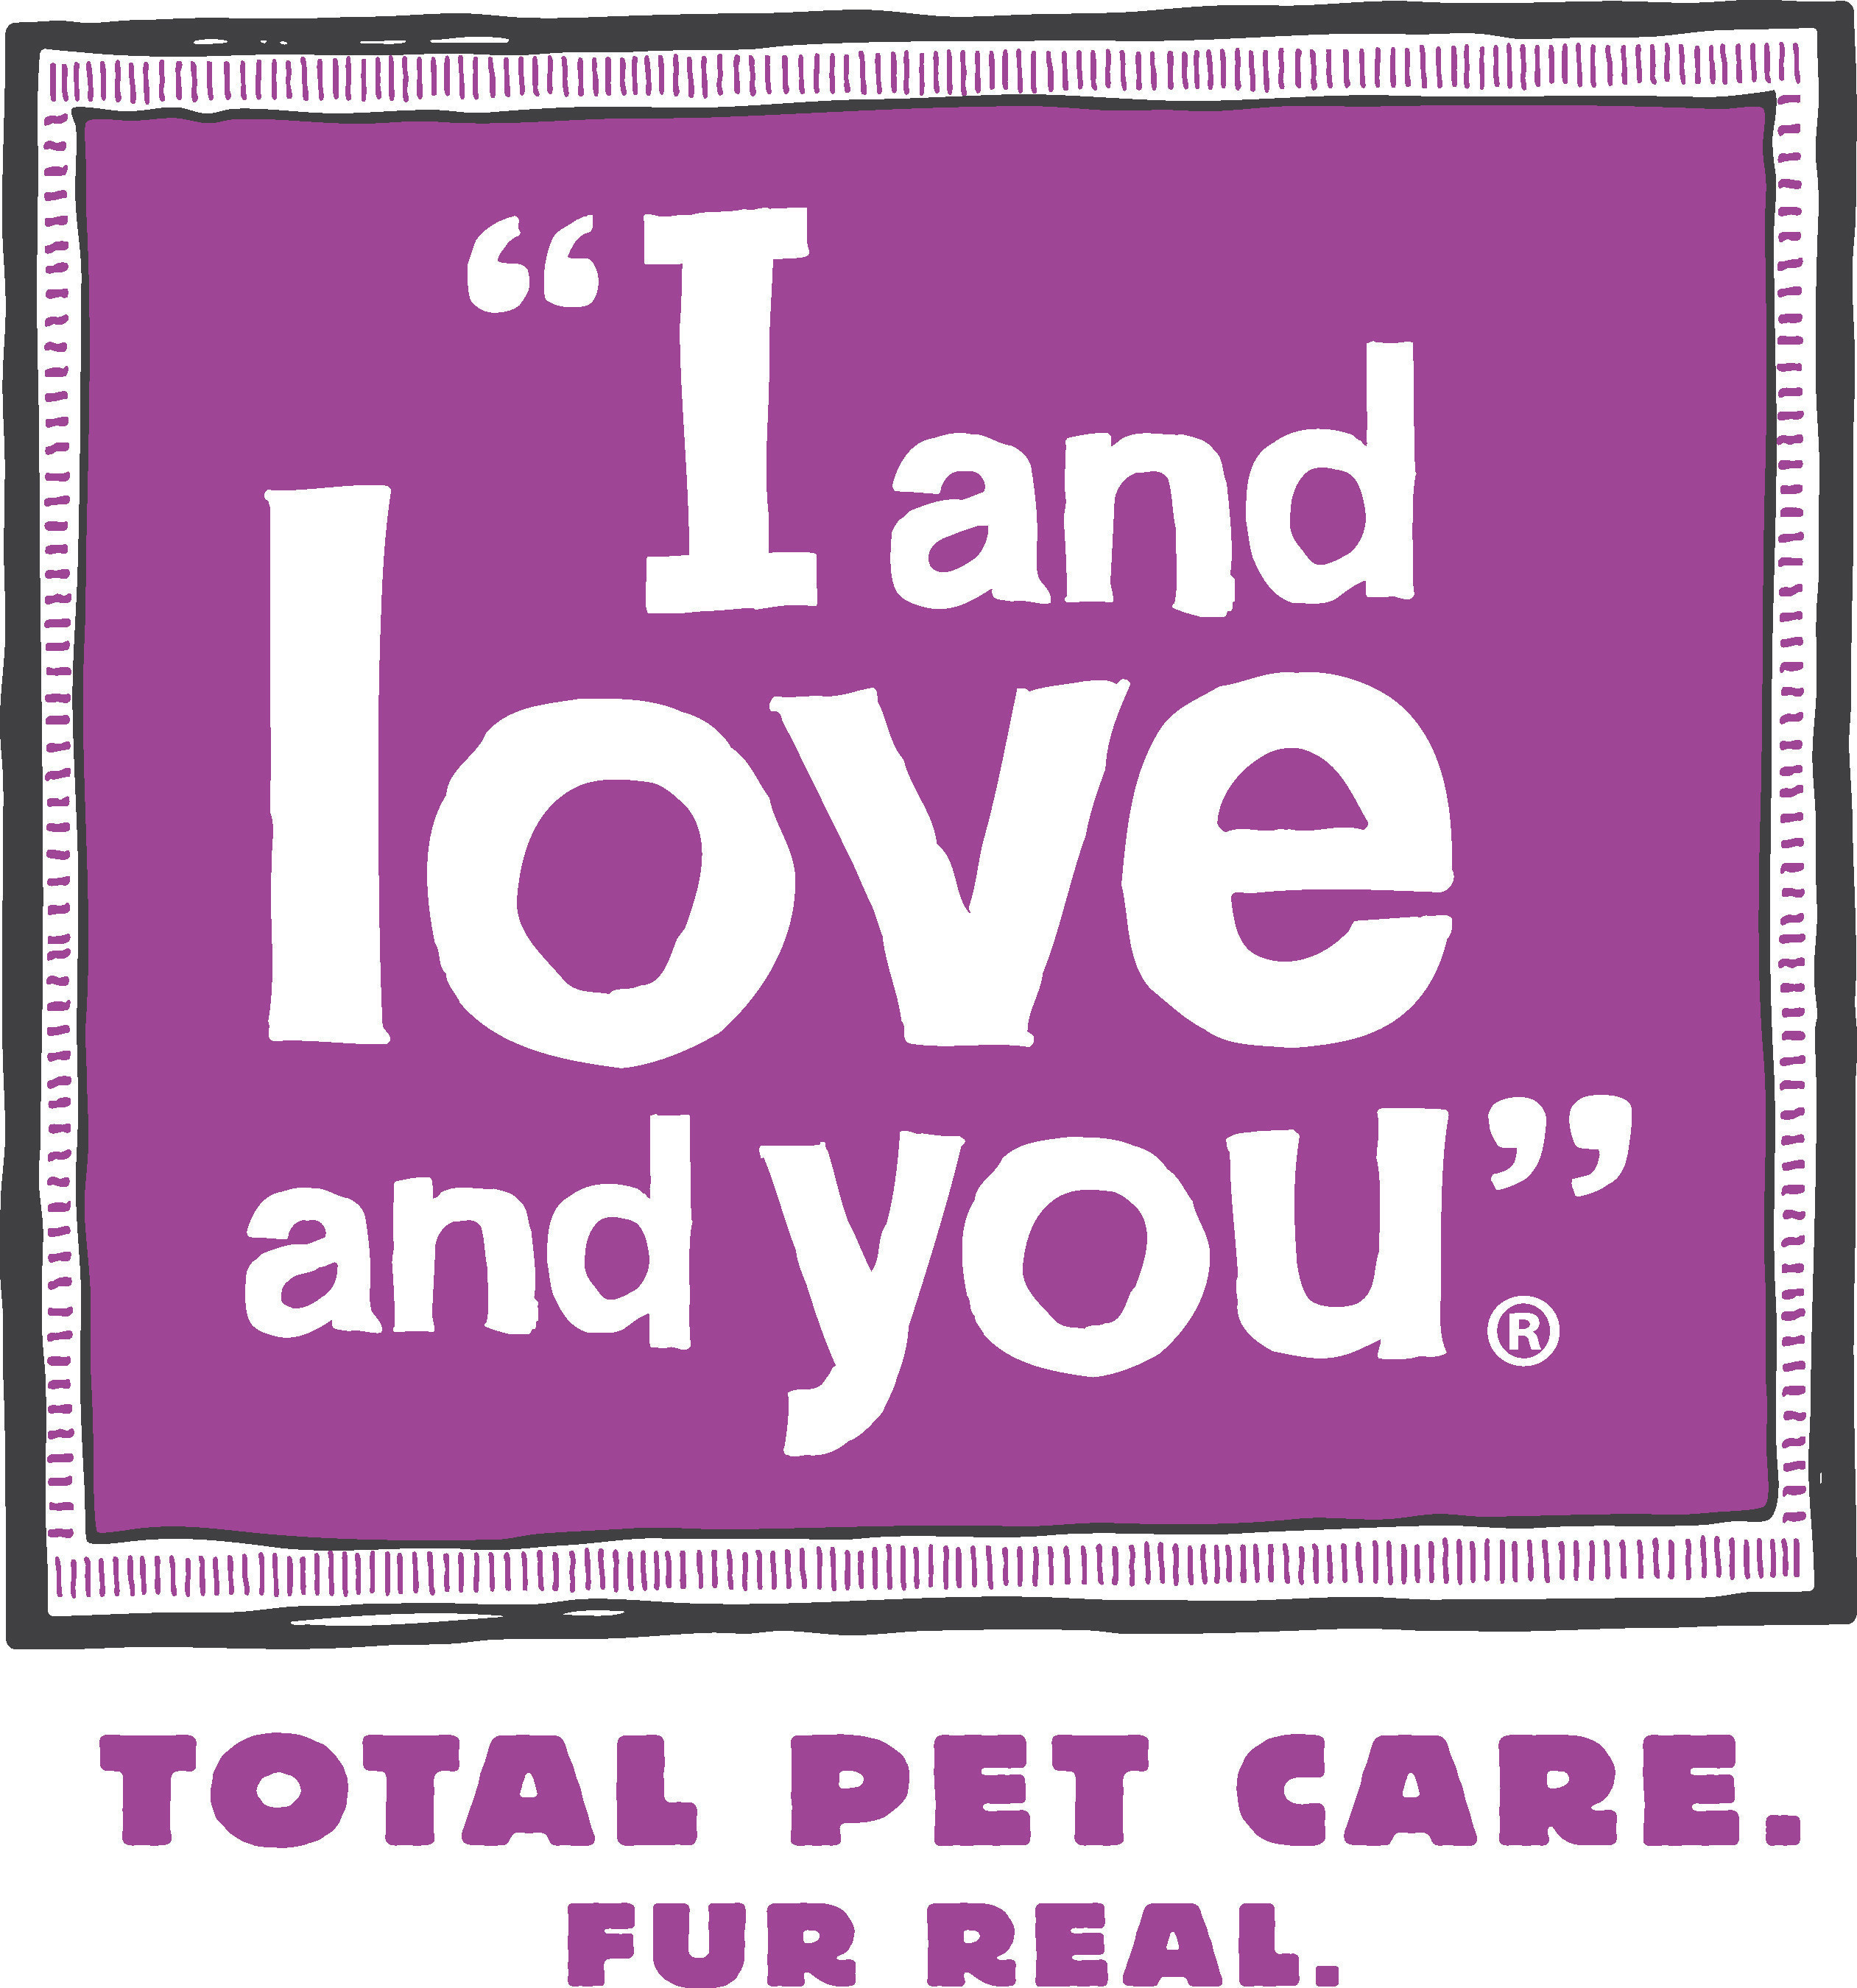 NatPets LLC, d/b/a "I and love and you"